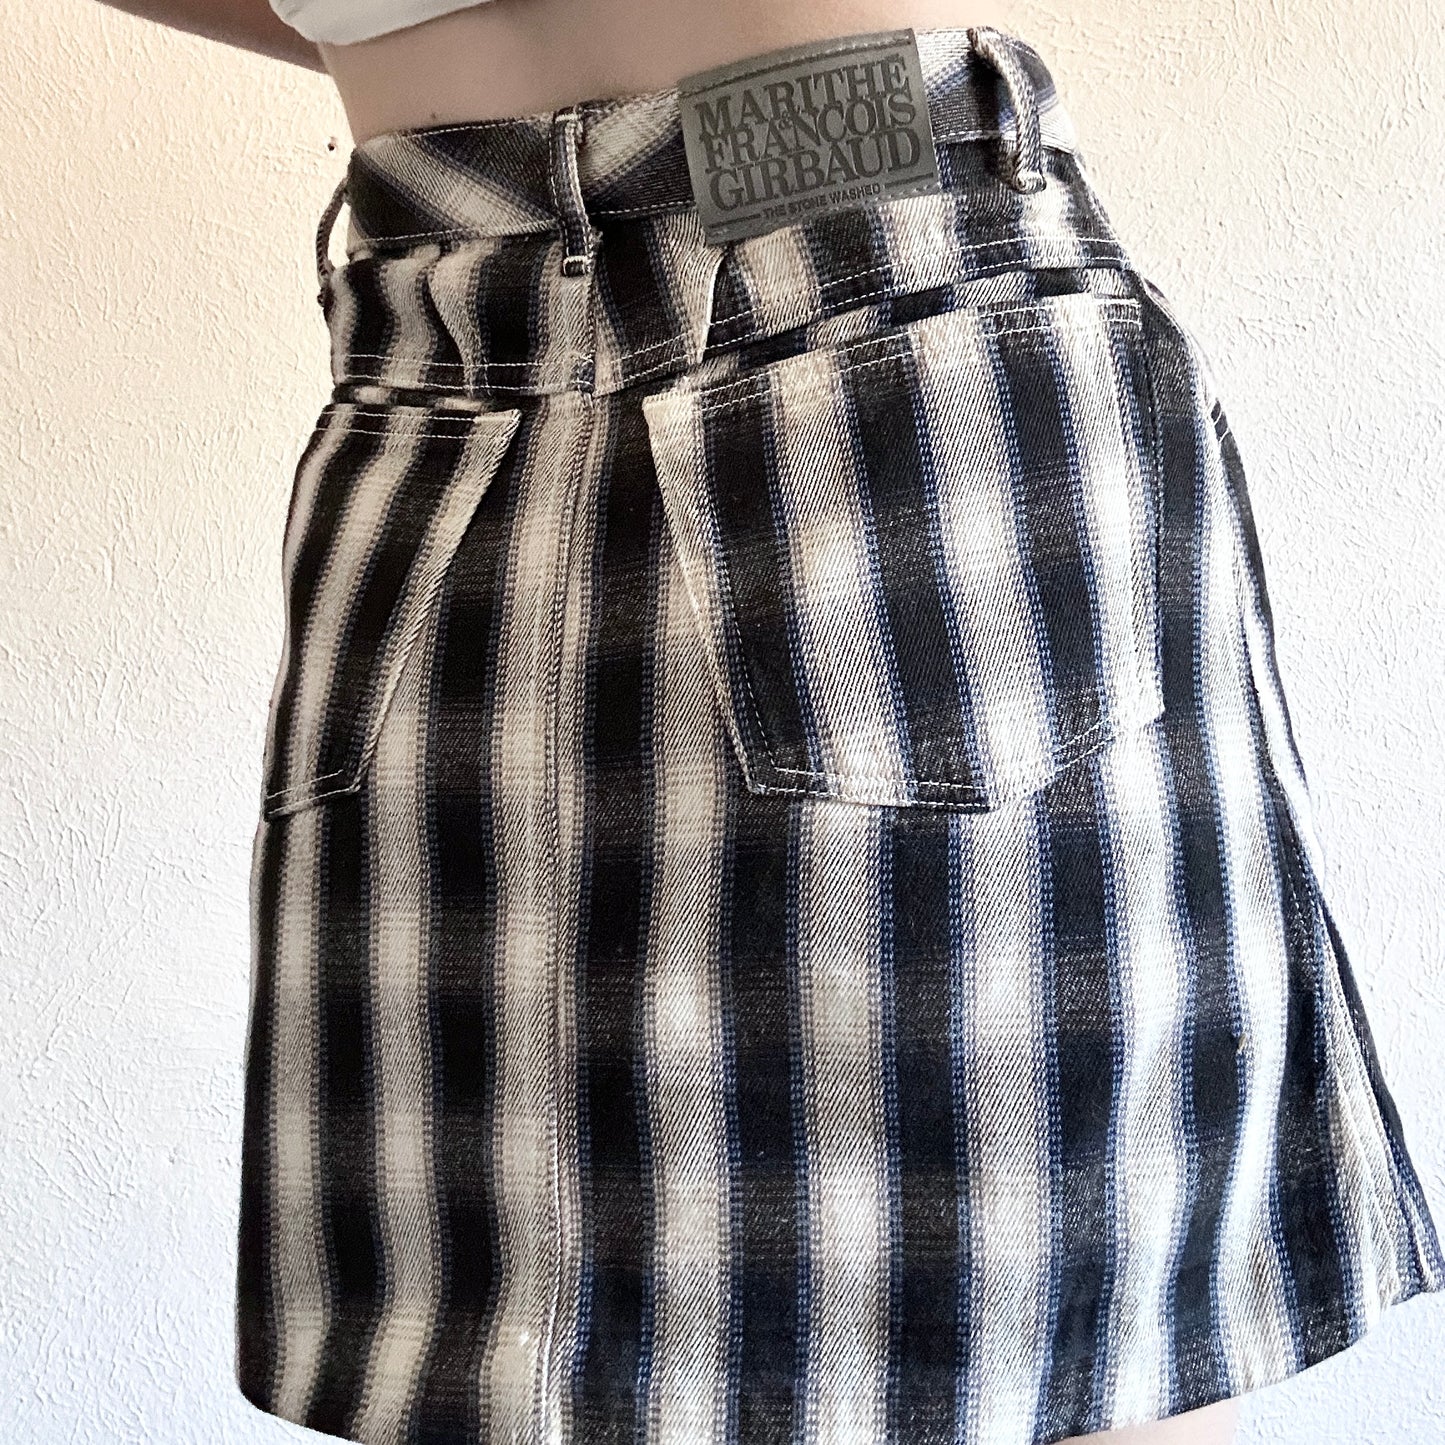 80'S VINTAGE GIRBAUD JEAN SKIRT // SIZE SMALL